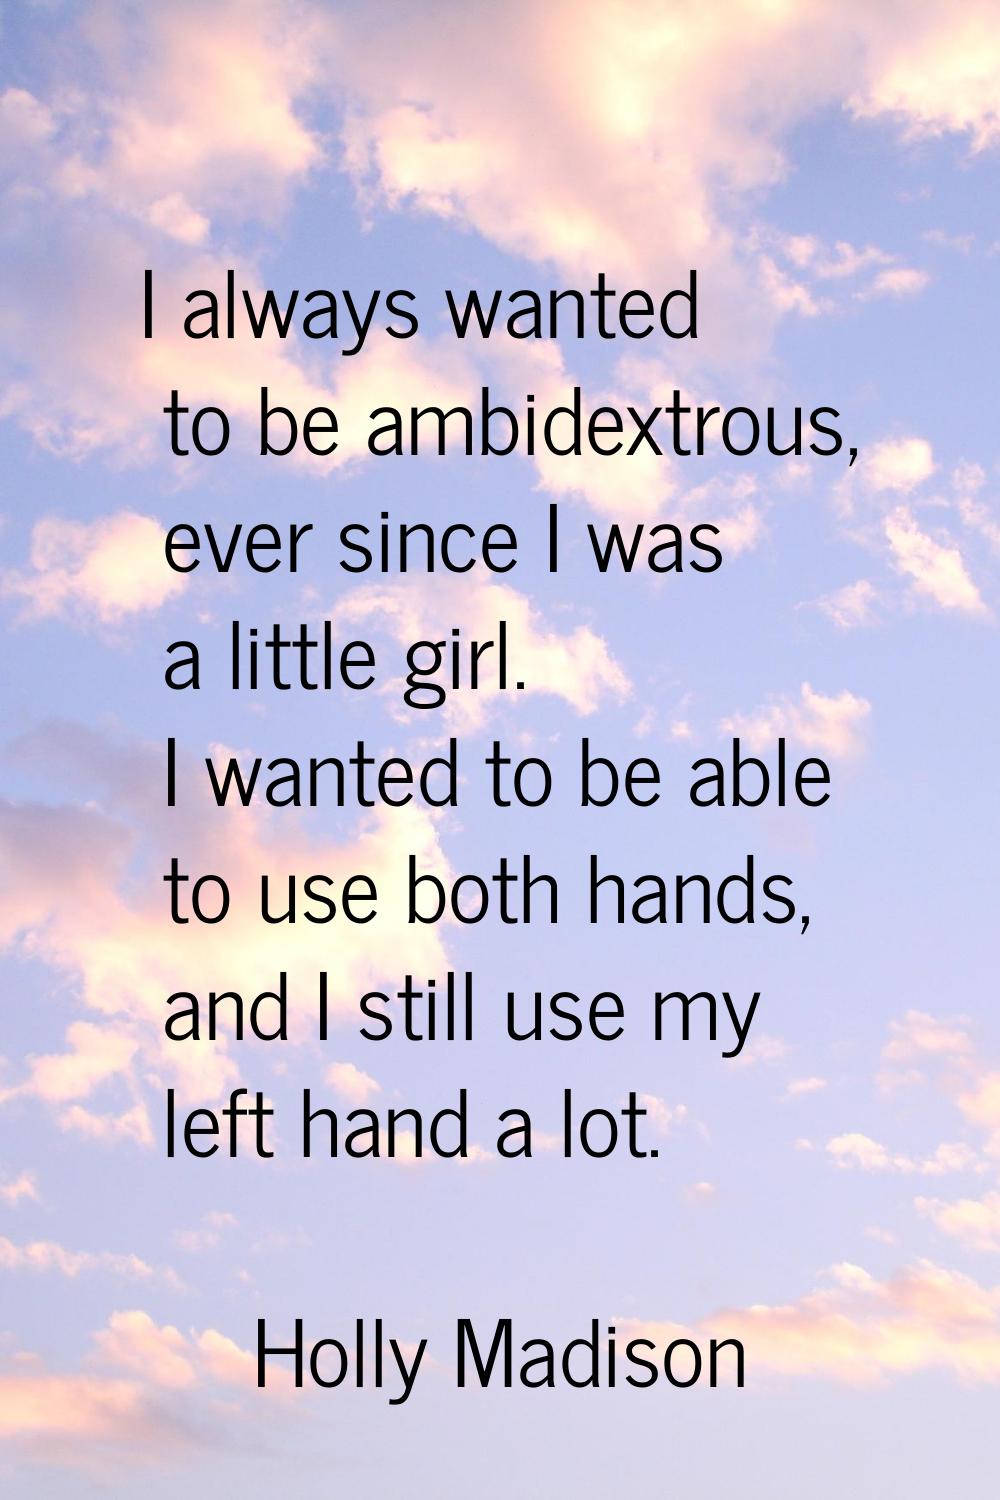 I always wanted to be ambidextrous, ever since I was a little girl. I wanted to be able to use both